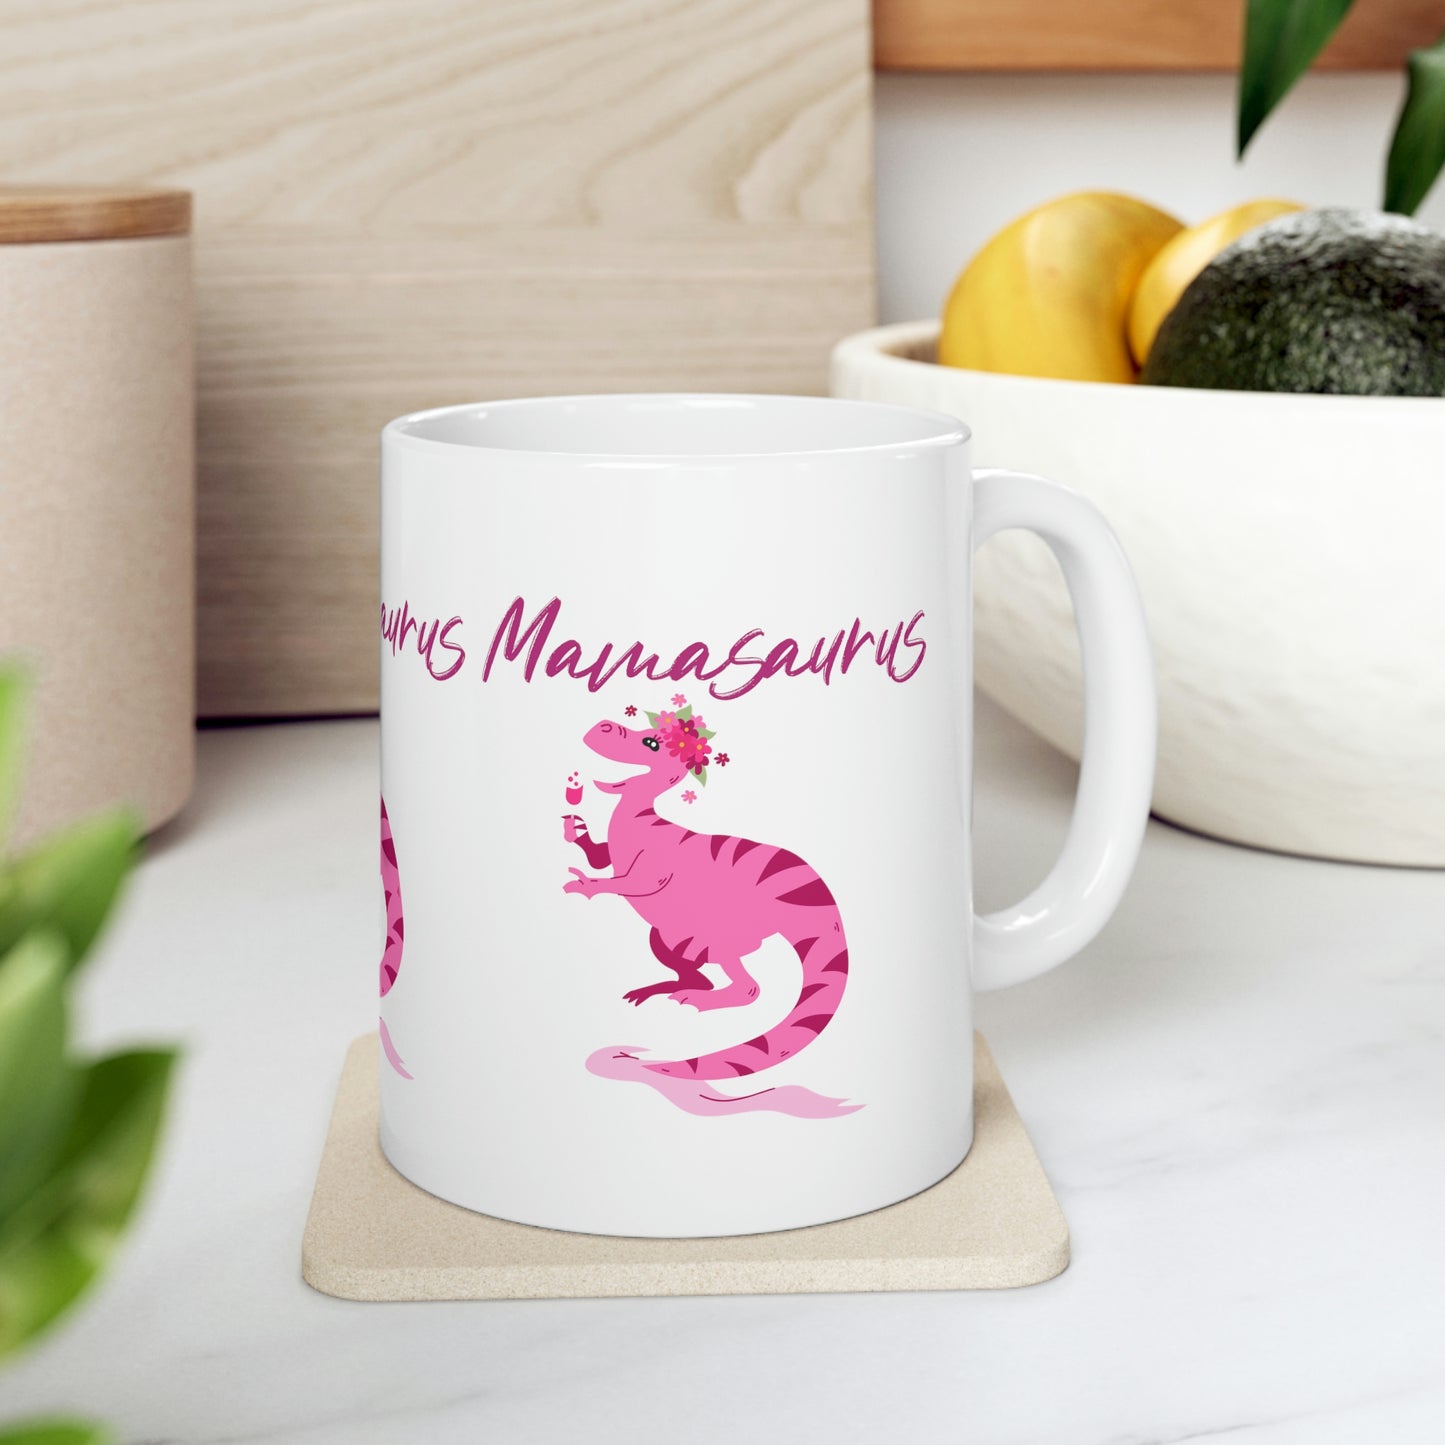 Mock up of the mug on a surface with a bowl of fruit in the background